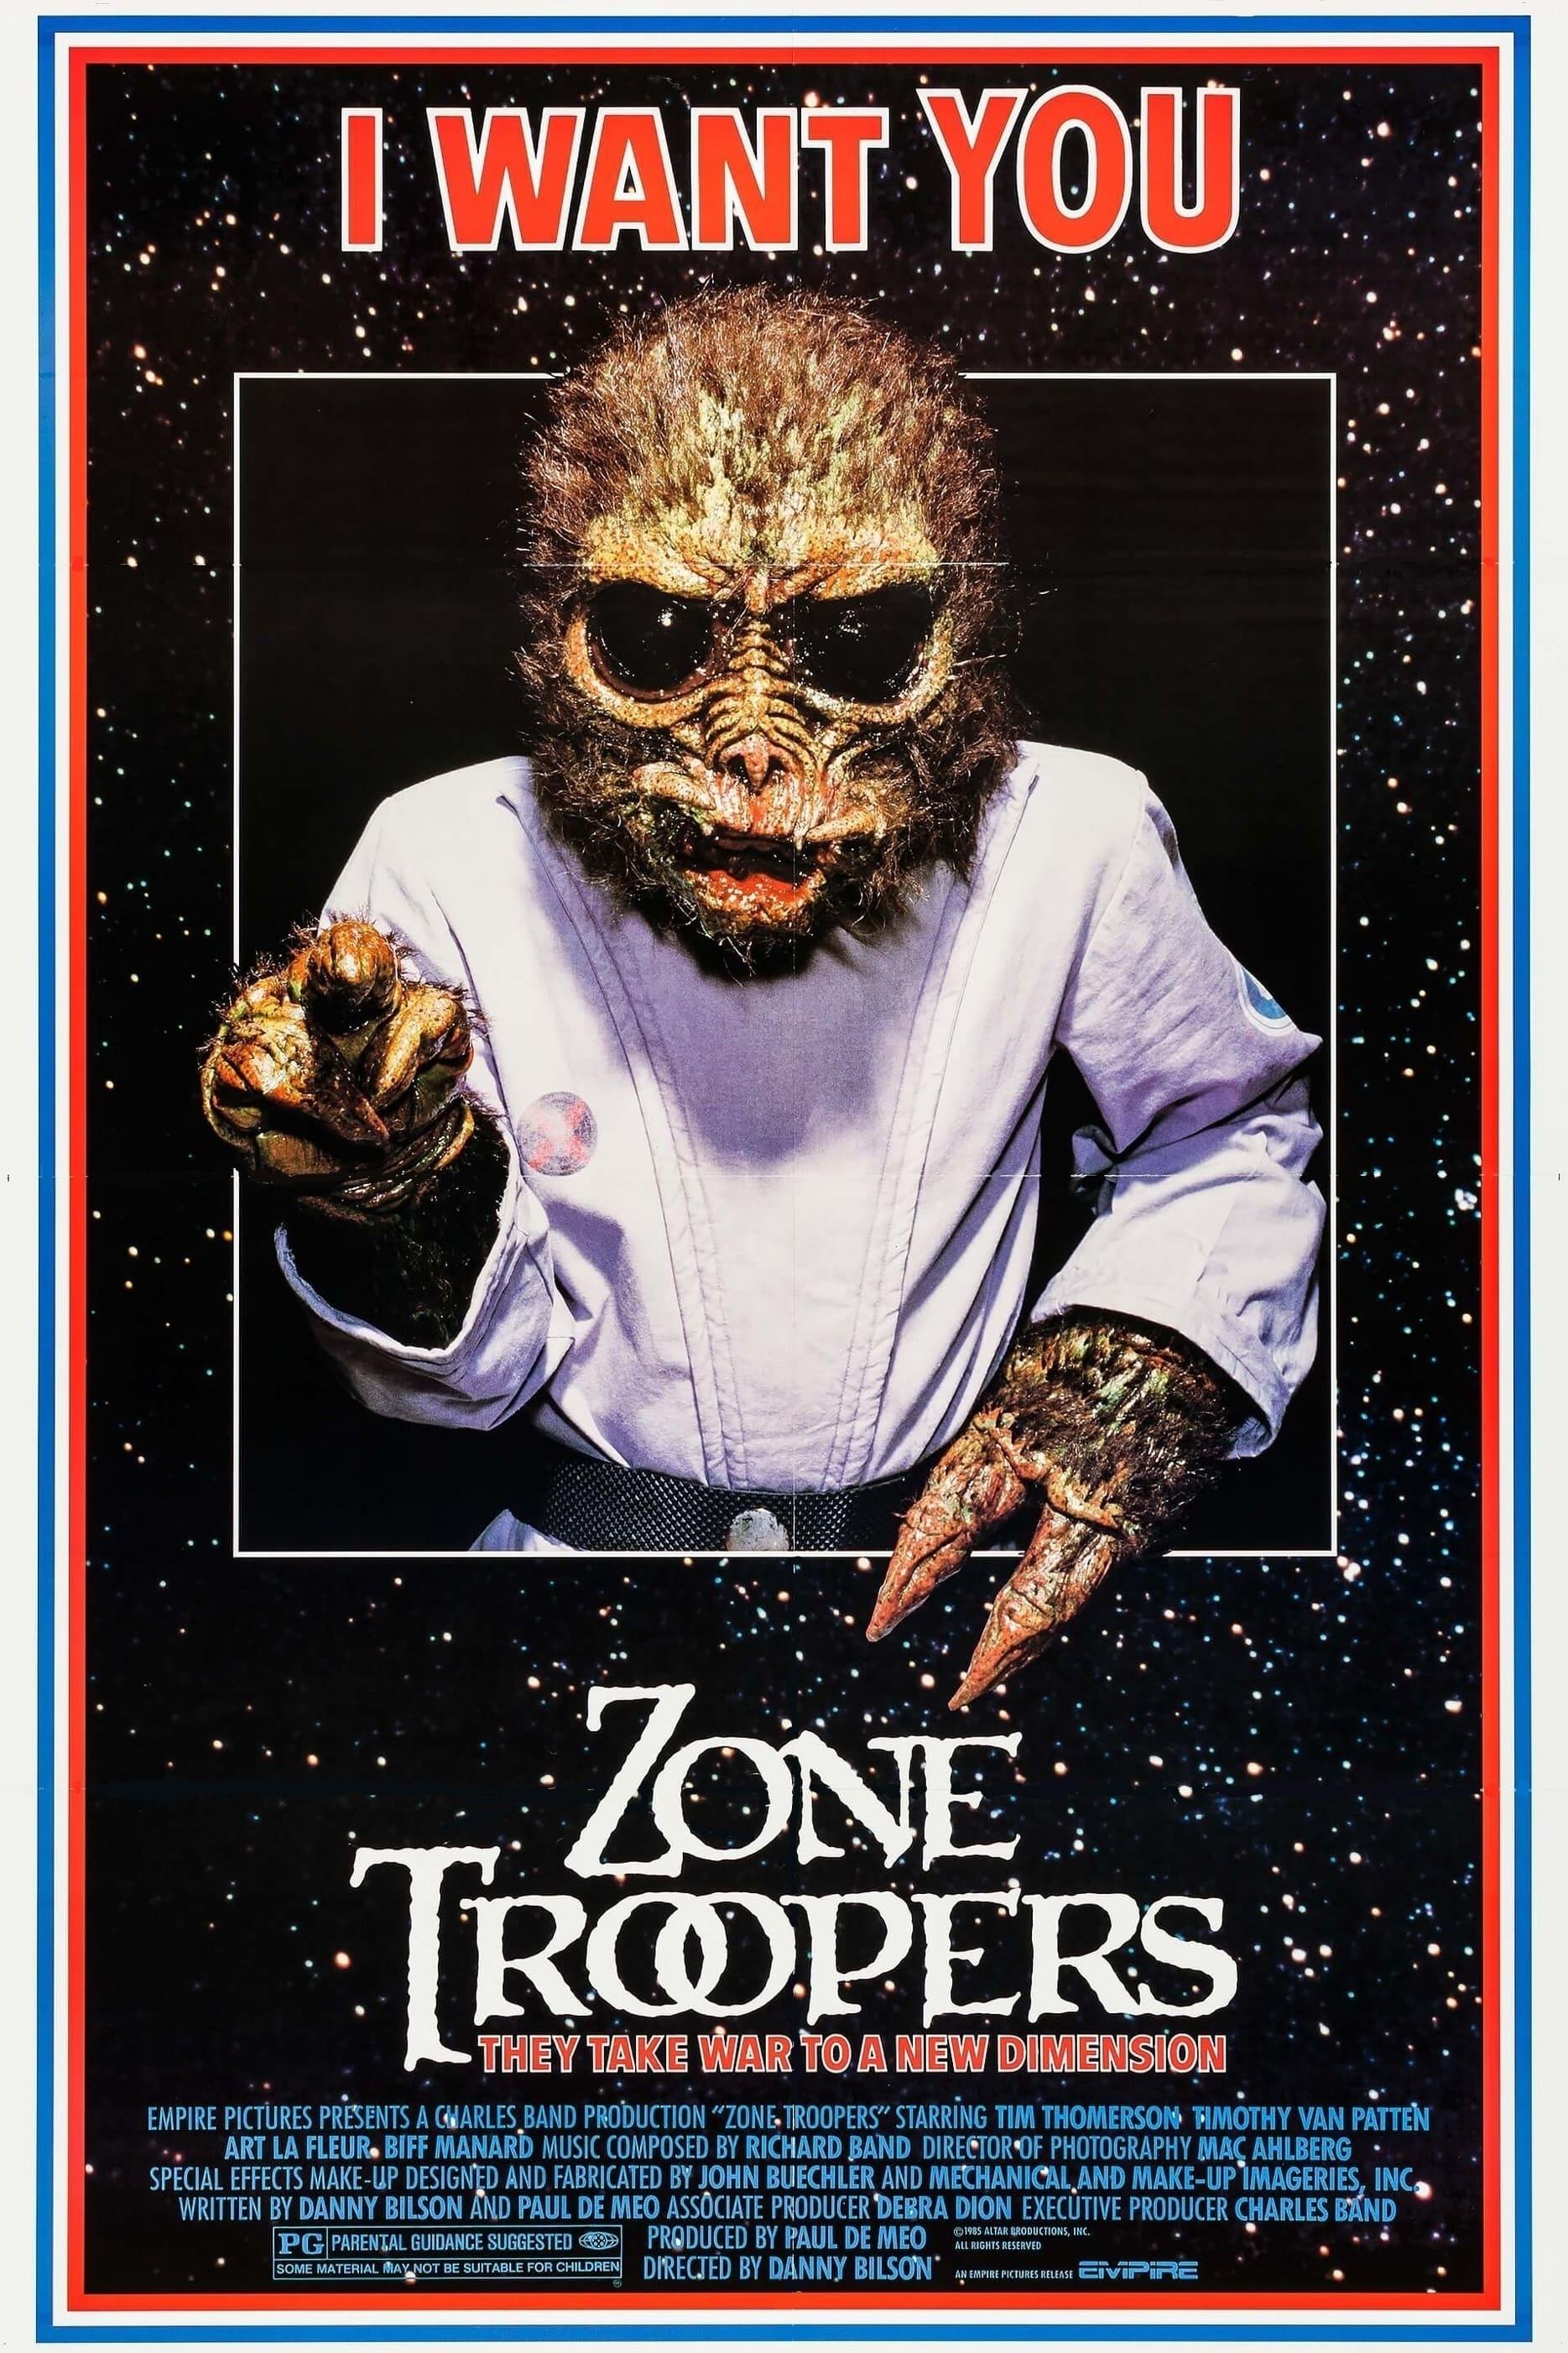 Zone Troopers poster